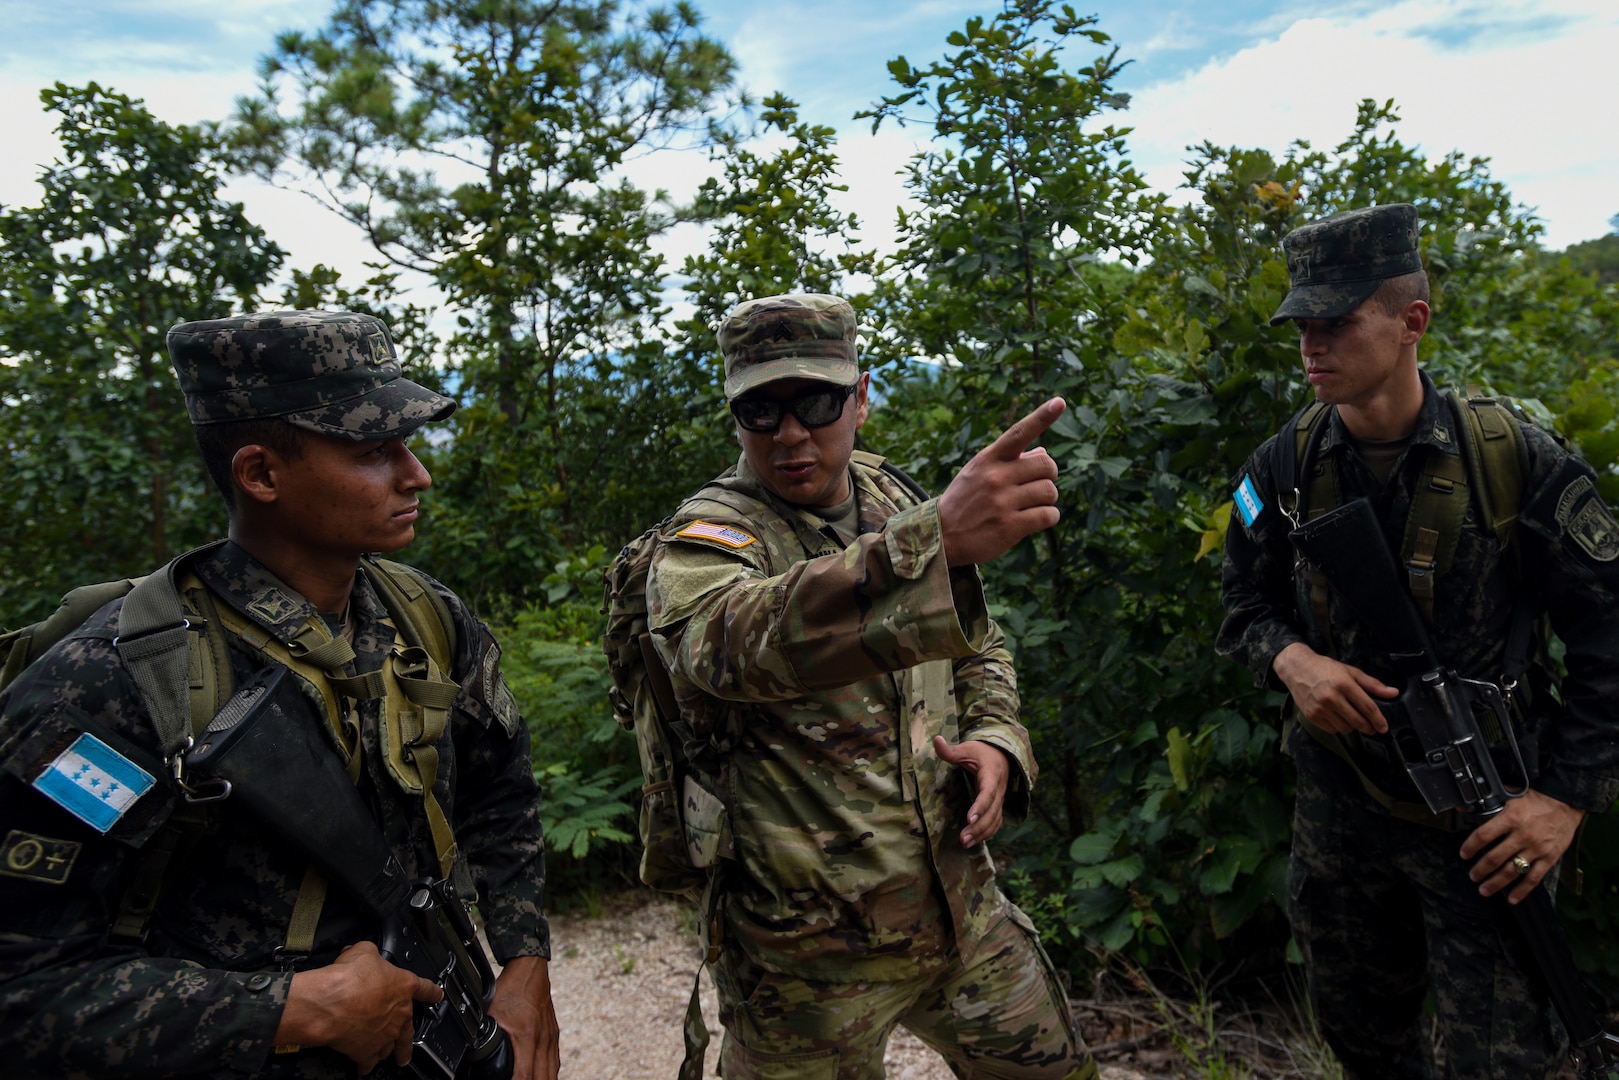 Sgt. Osvaldo Pina, a member of the Georgia National Guard's 1st Battalion of the 54th Security Force Assistance Brigade, discusses the route during a 15-mile ruck march alongside Honduran Army counterparts near Tegucigalpa, Honduras, Sept. 8, 2022. Pina and other SFAB members were participating as part of their advising mission at the Honduran Army's Noncommissioned Officer Academy during a six-month deployment to Honduras —the first National Guard deployment of its kind.